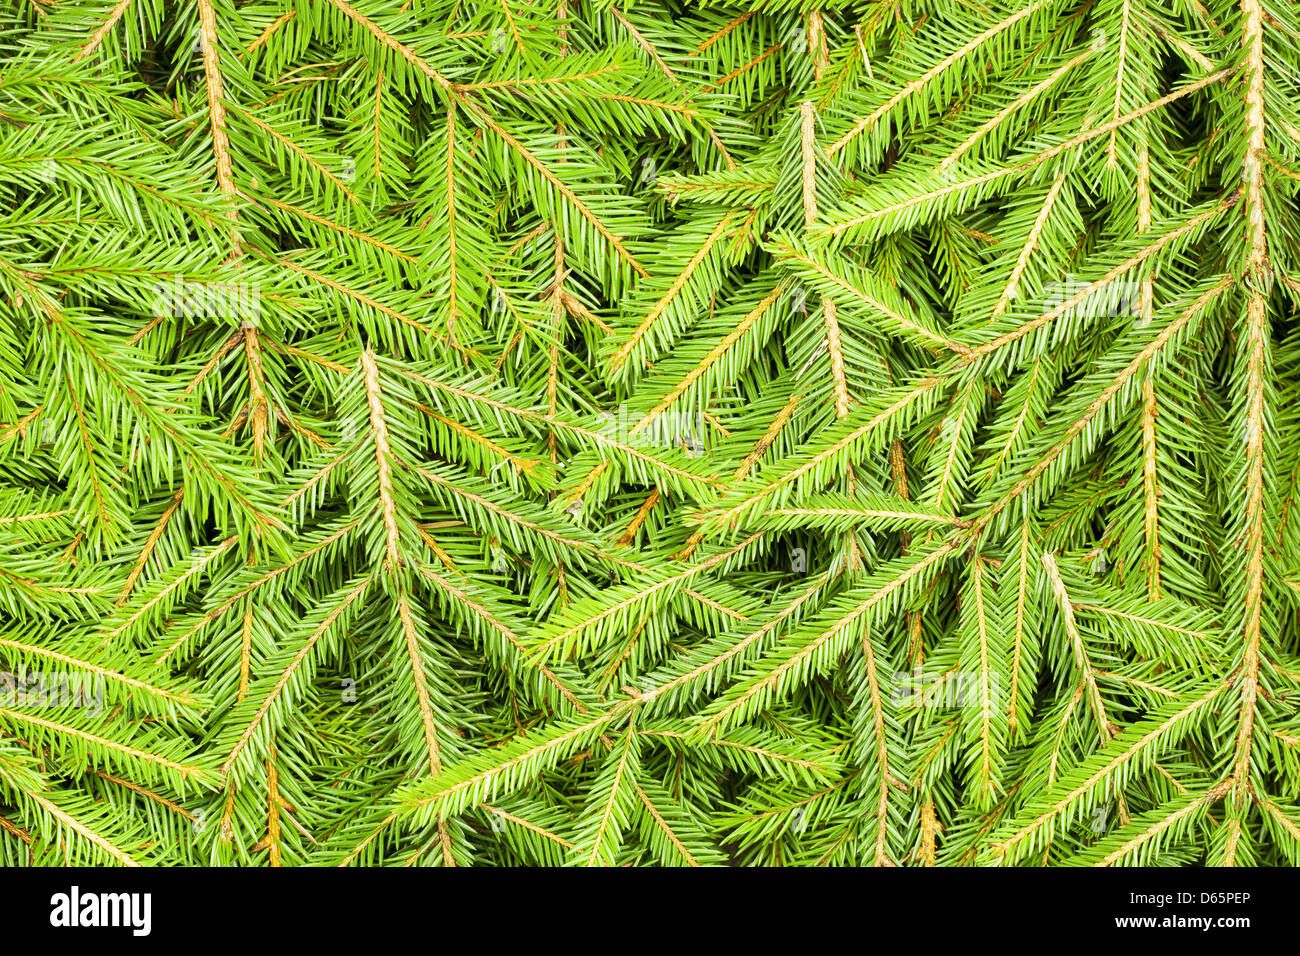 Background of spruce branches Stock Photo